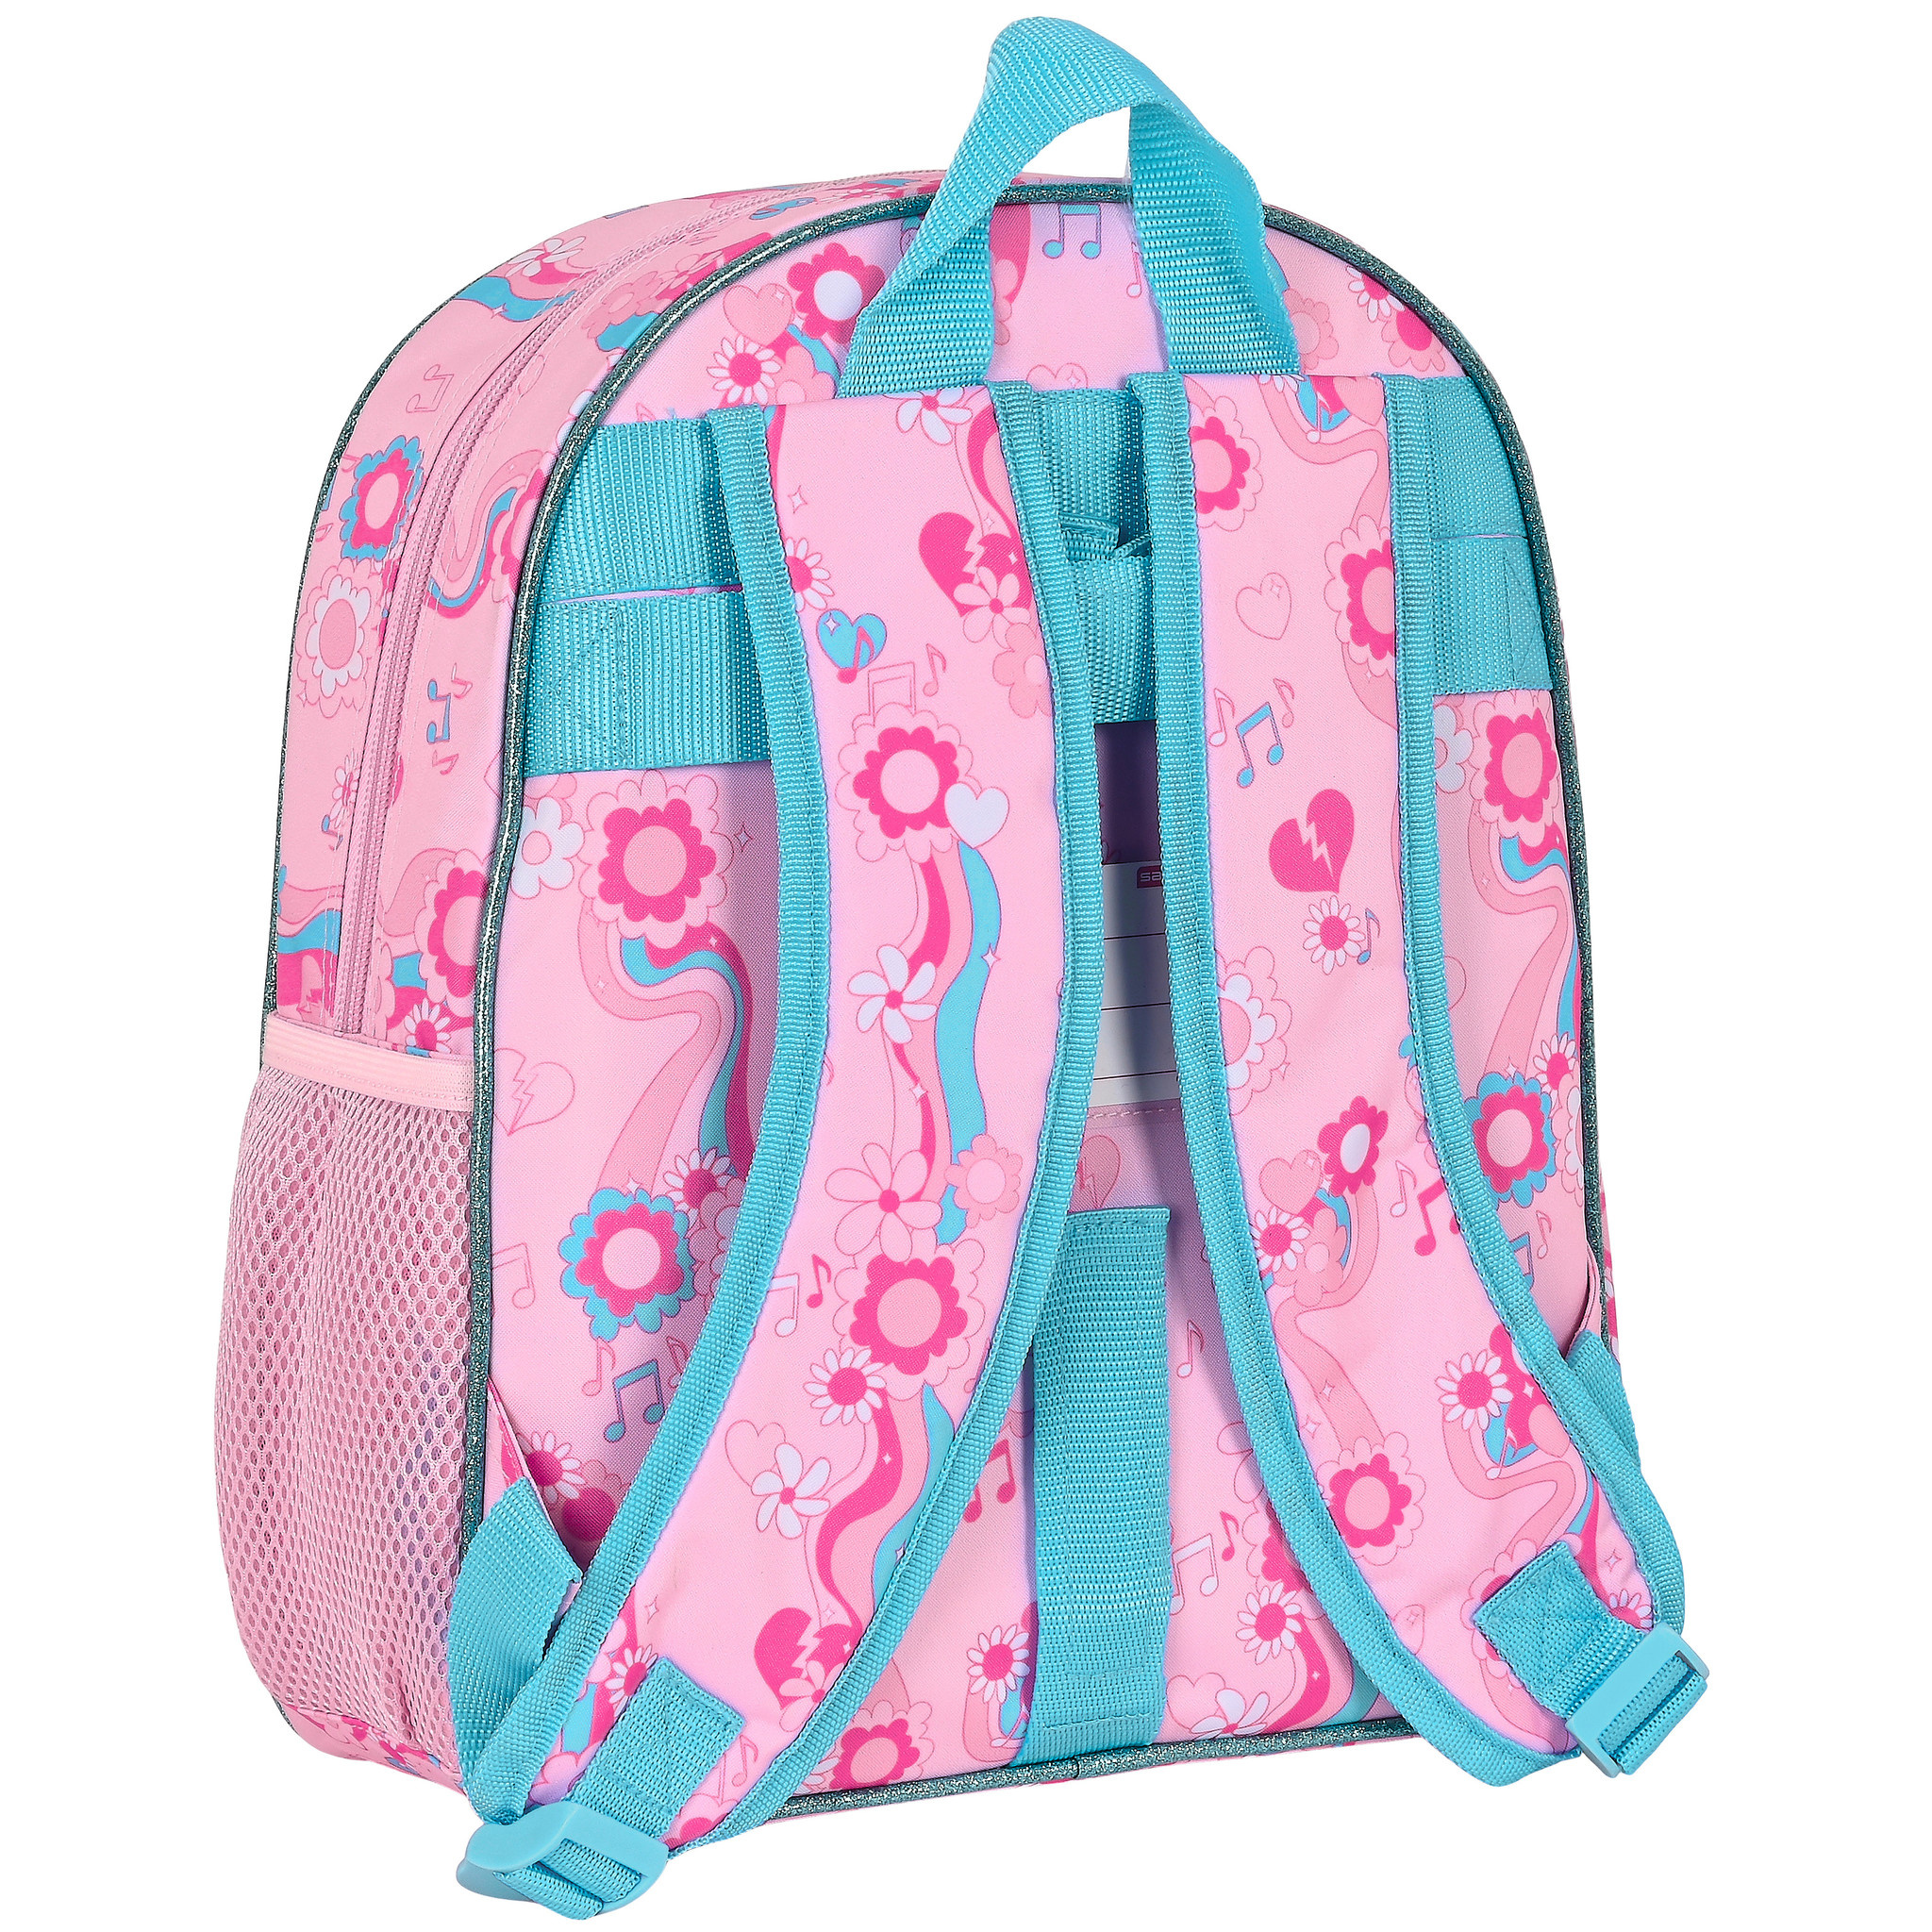 L.O.L. Surprise Backpack, Glow Girls - 34 x 28 x 10 cm - Polyester